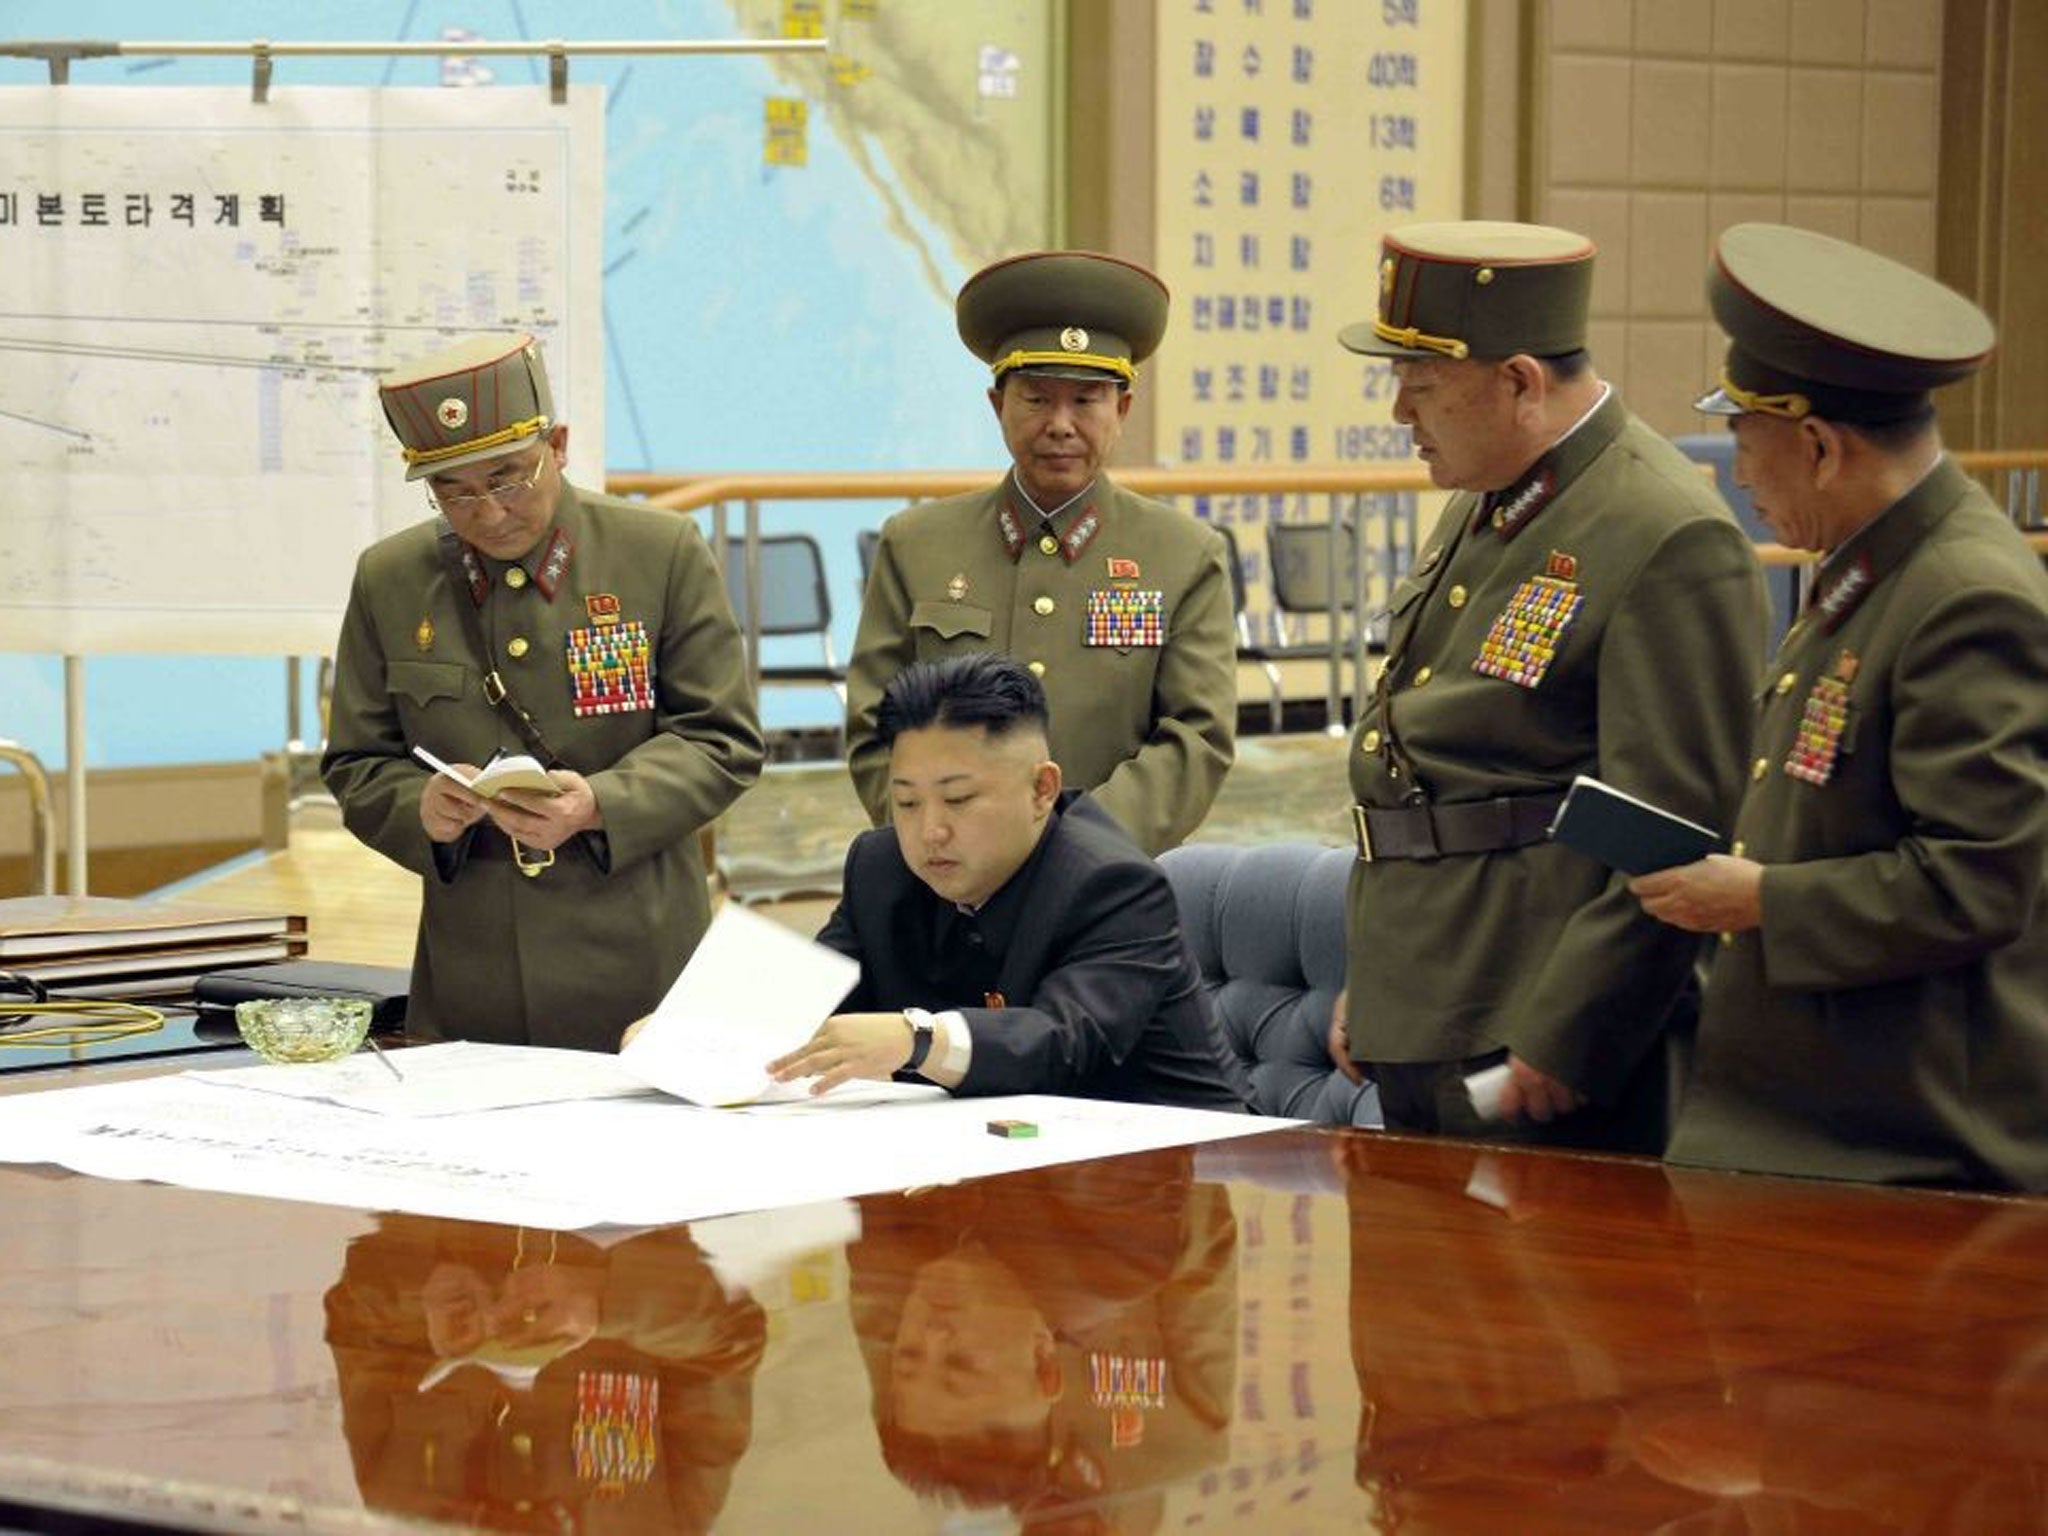 A picture released by the North Korean Central News Agency (KCNA) on 29 March 2013 shows North Korean leader Kim Jong-un (sitting) convening an urgent operation meeting